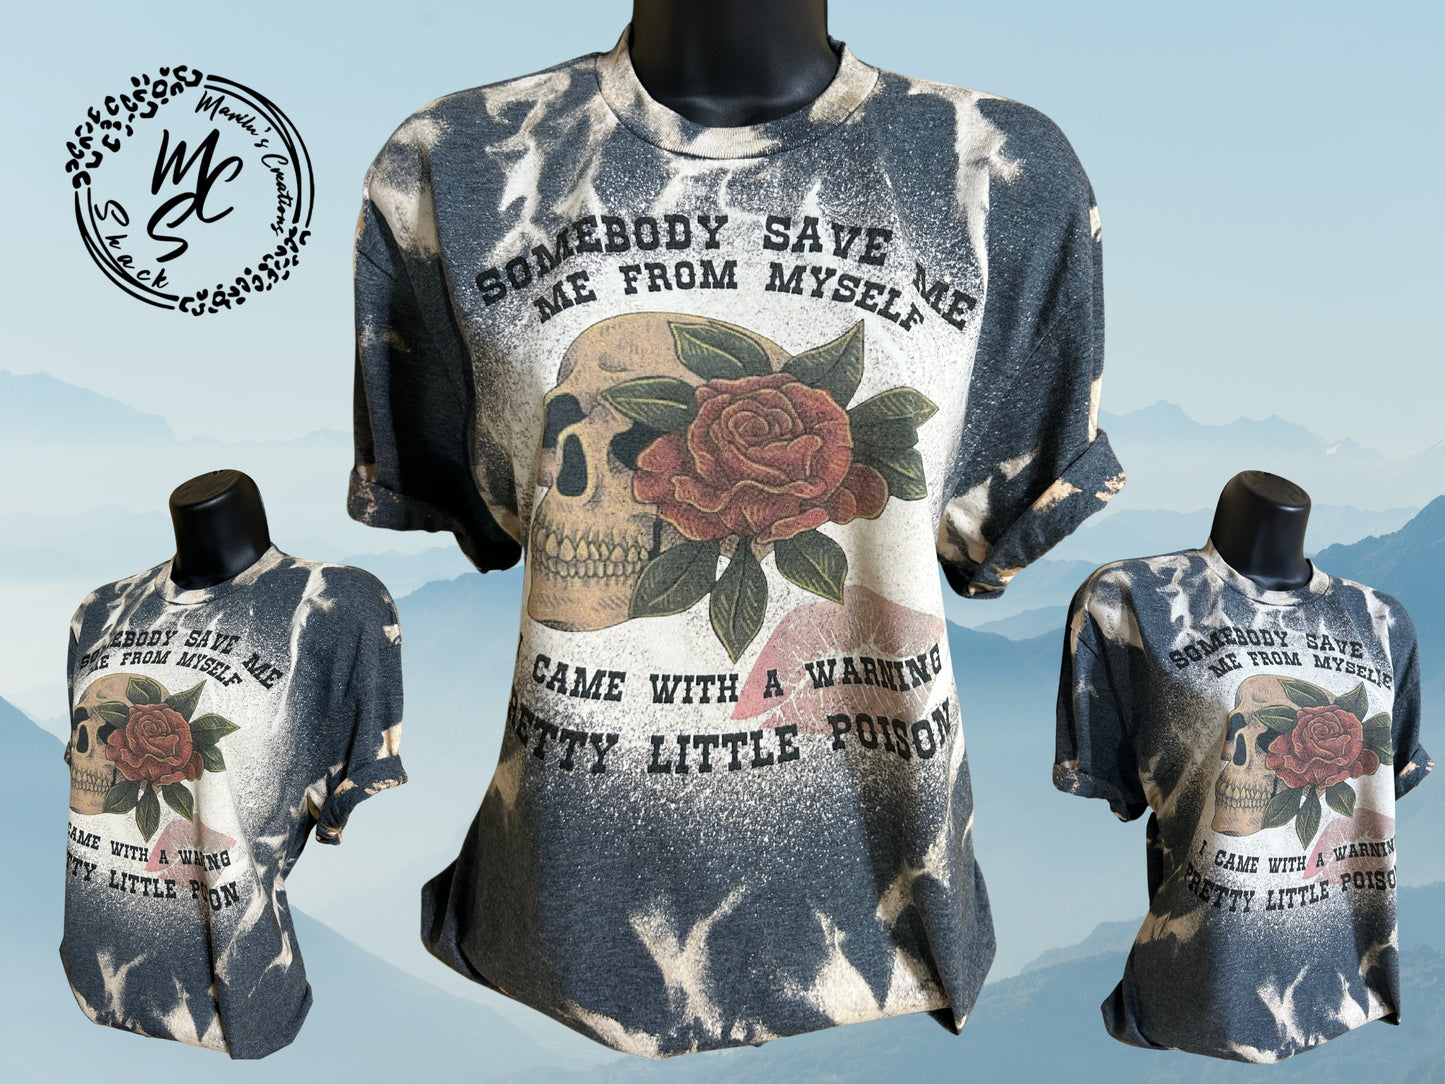 Somebody Save Me, Me from Myself shirt, soft tee, Came with a warning top, Pretty Little Poison, Skull and Rose t-shirt, concert tee.